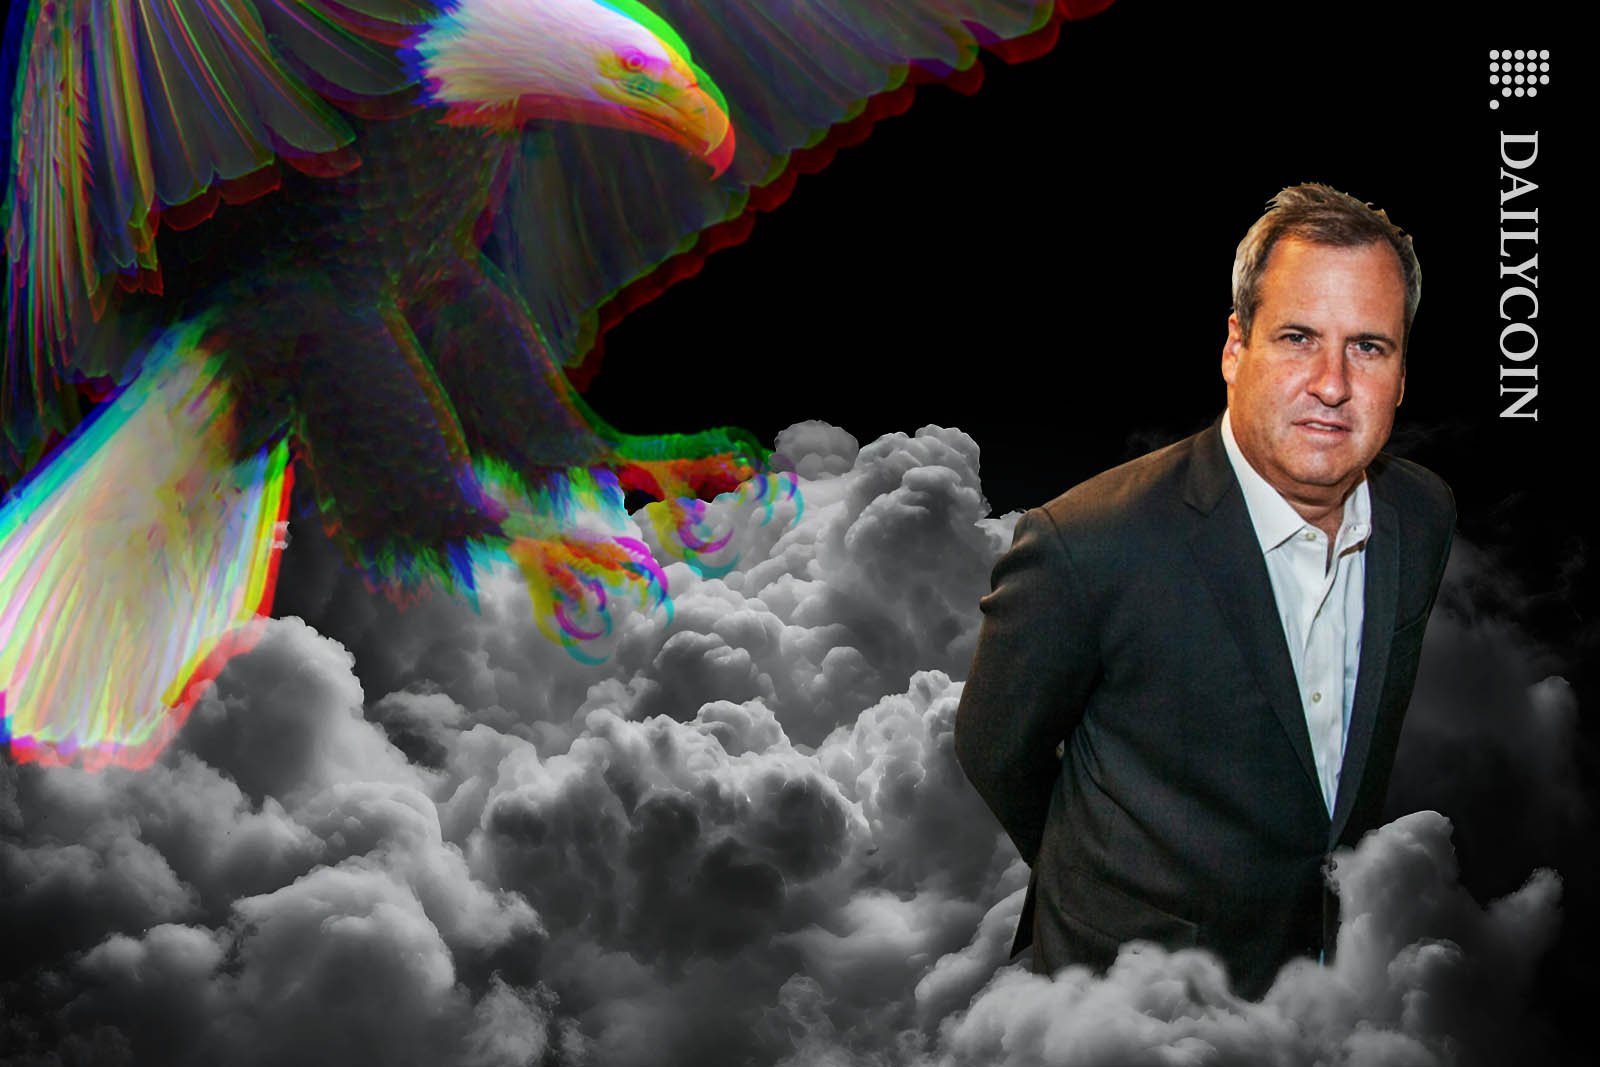 B. Riley being attacked by an American eagle above the clouds.